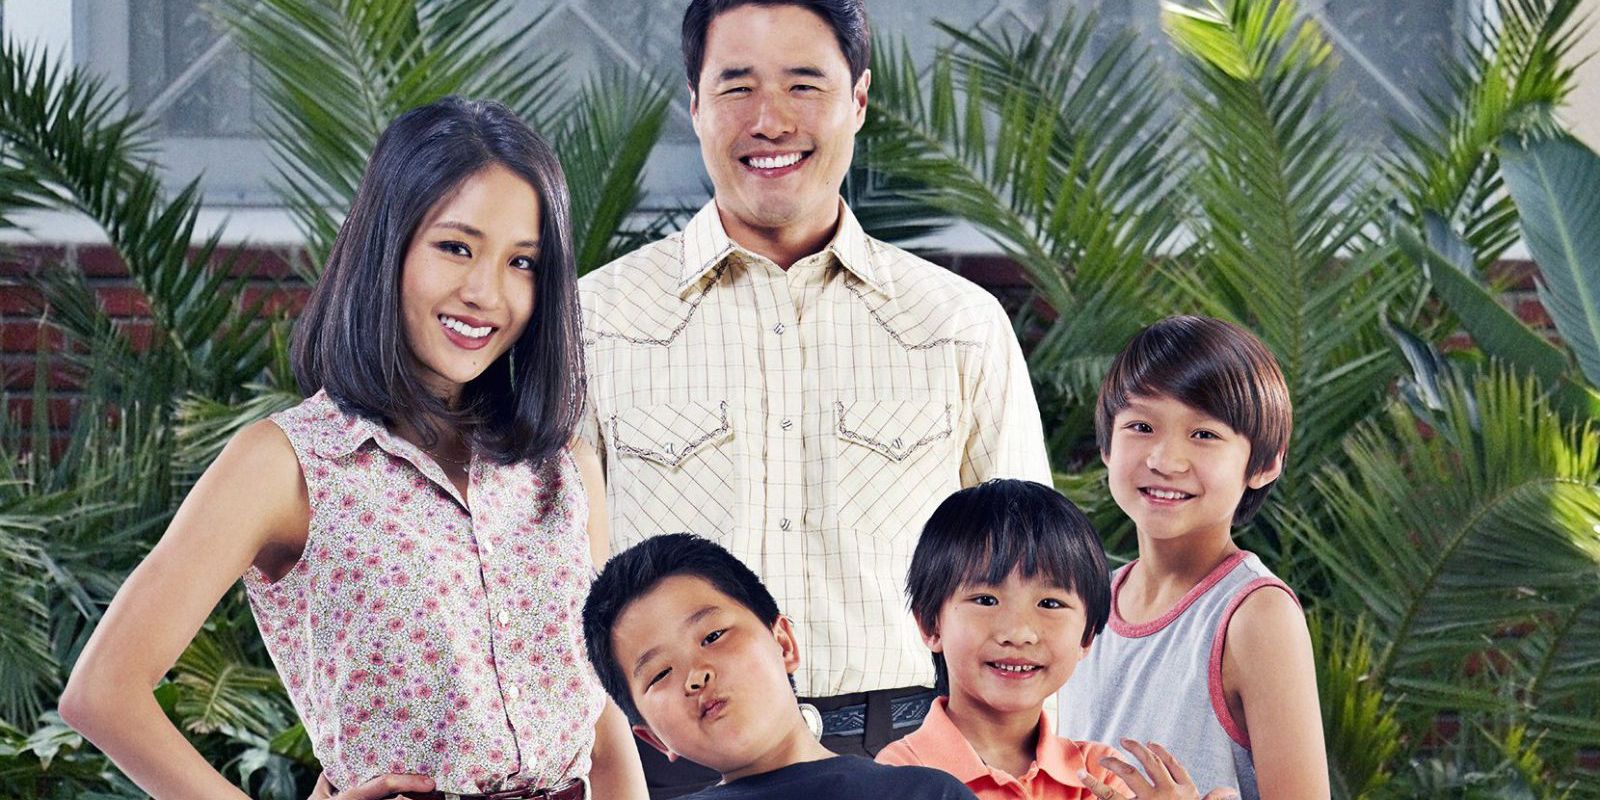 Fresh Off the Boat,' 'Speechless' Renewed at ABC - TheWrap